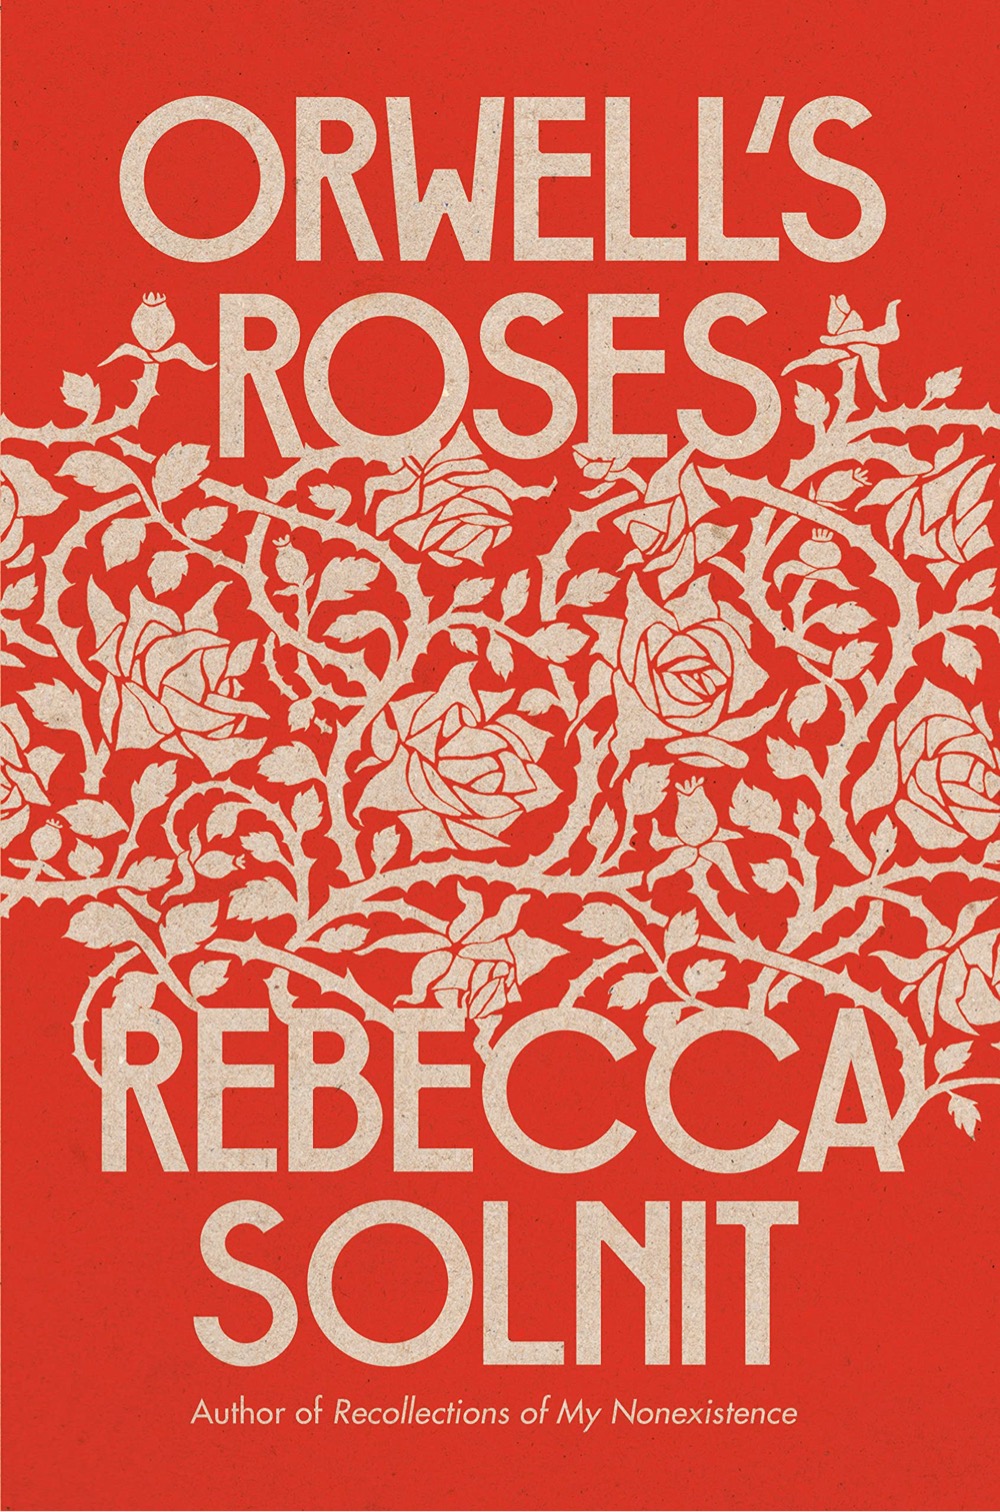 book cover of Orwell's Roses by Rebecca Solnit